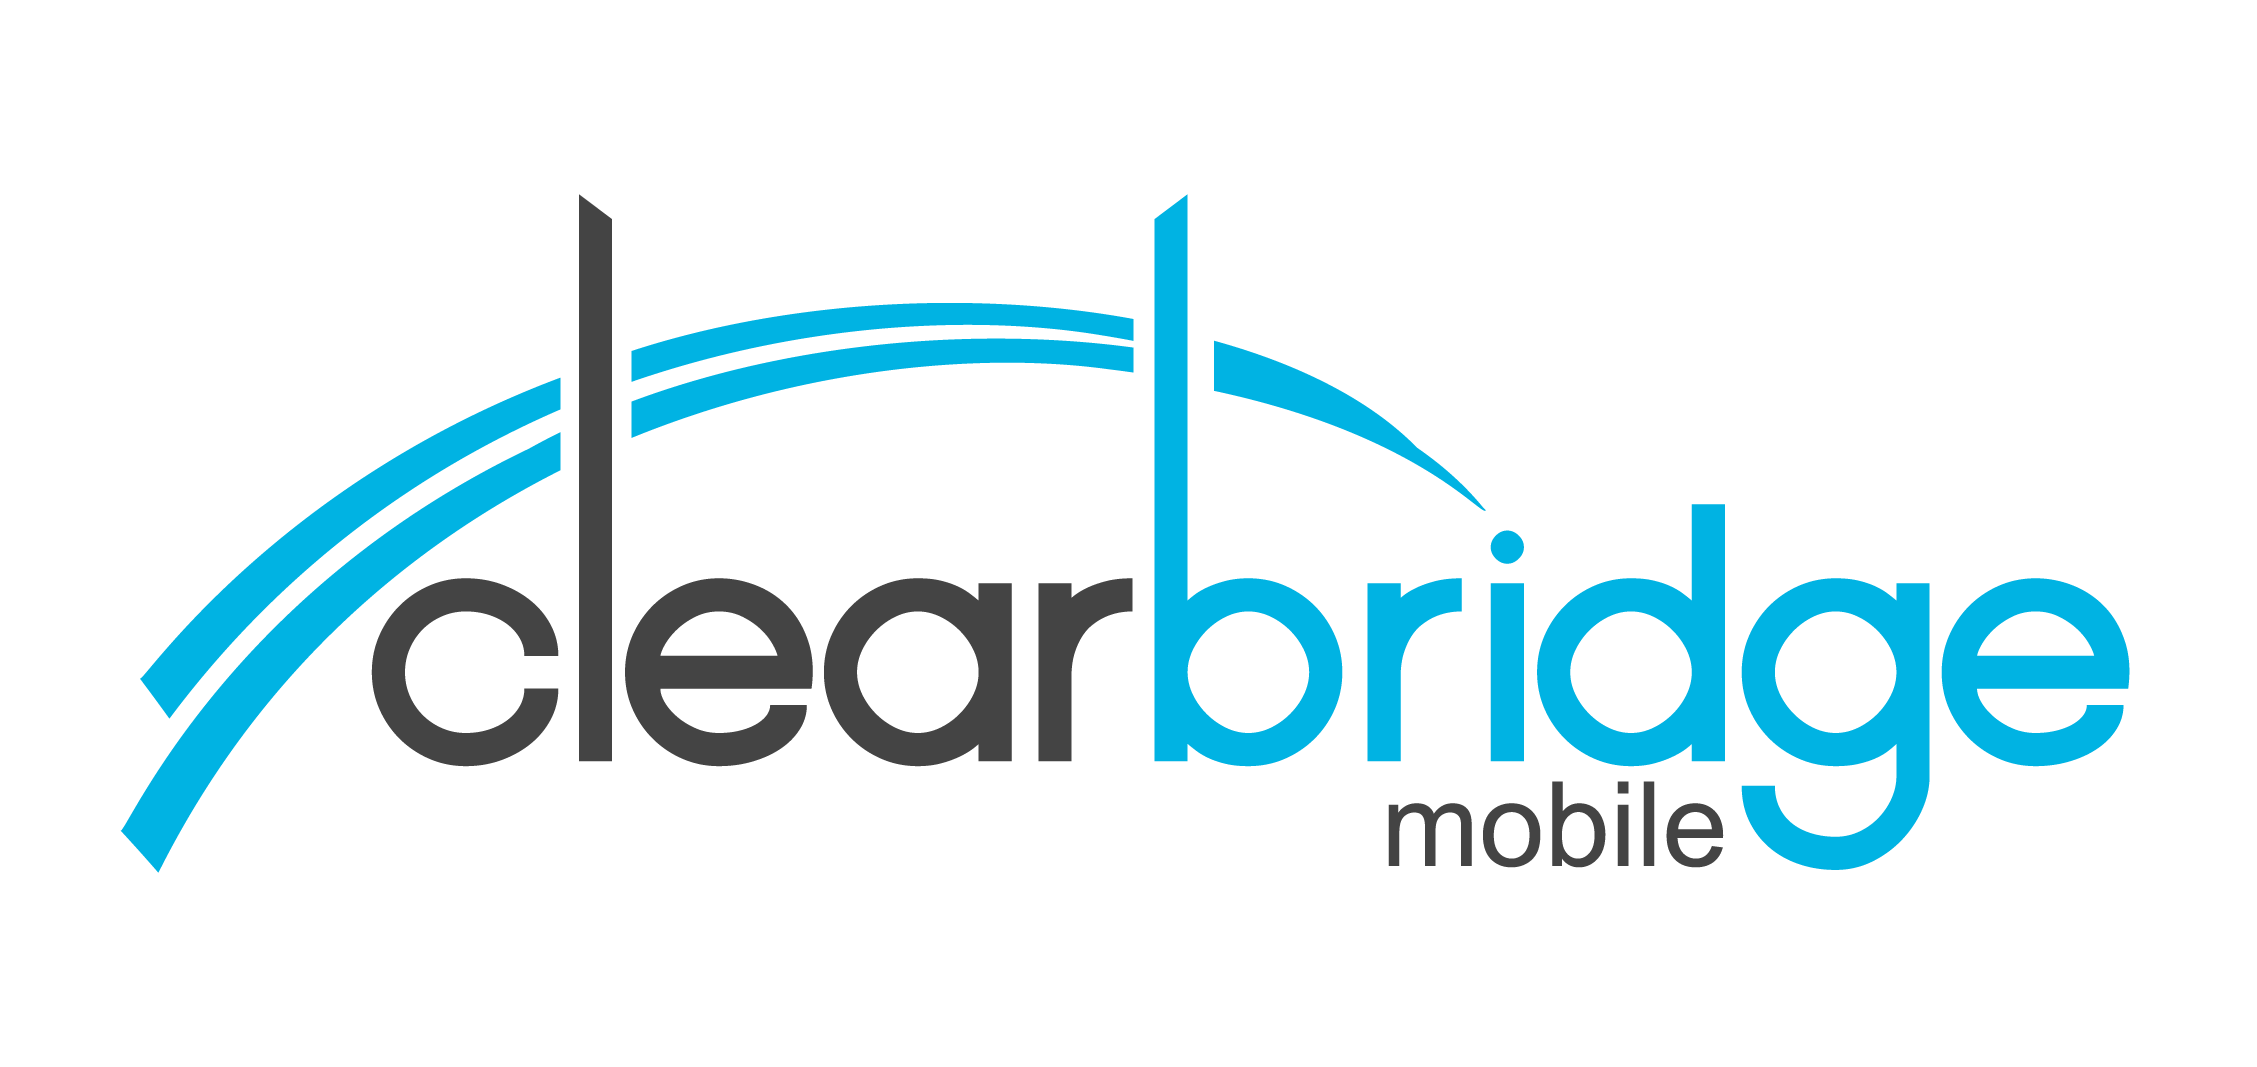 Clearbridge Mobile Continues to Grow, Ranking No. 196 on